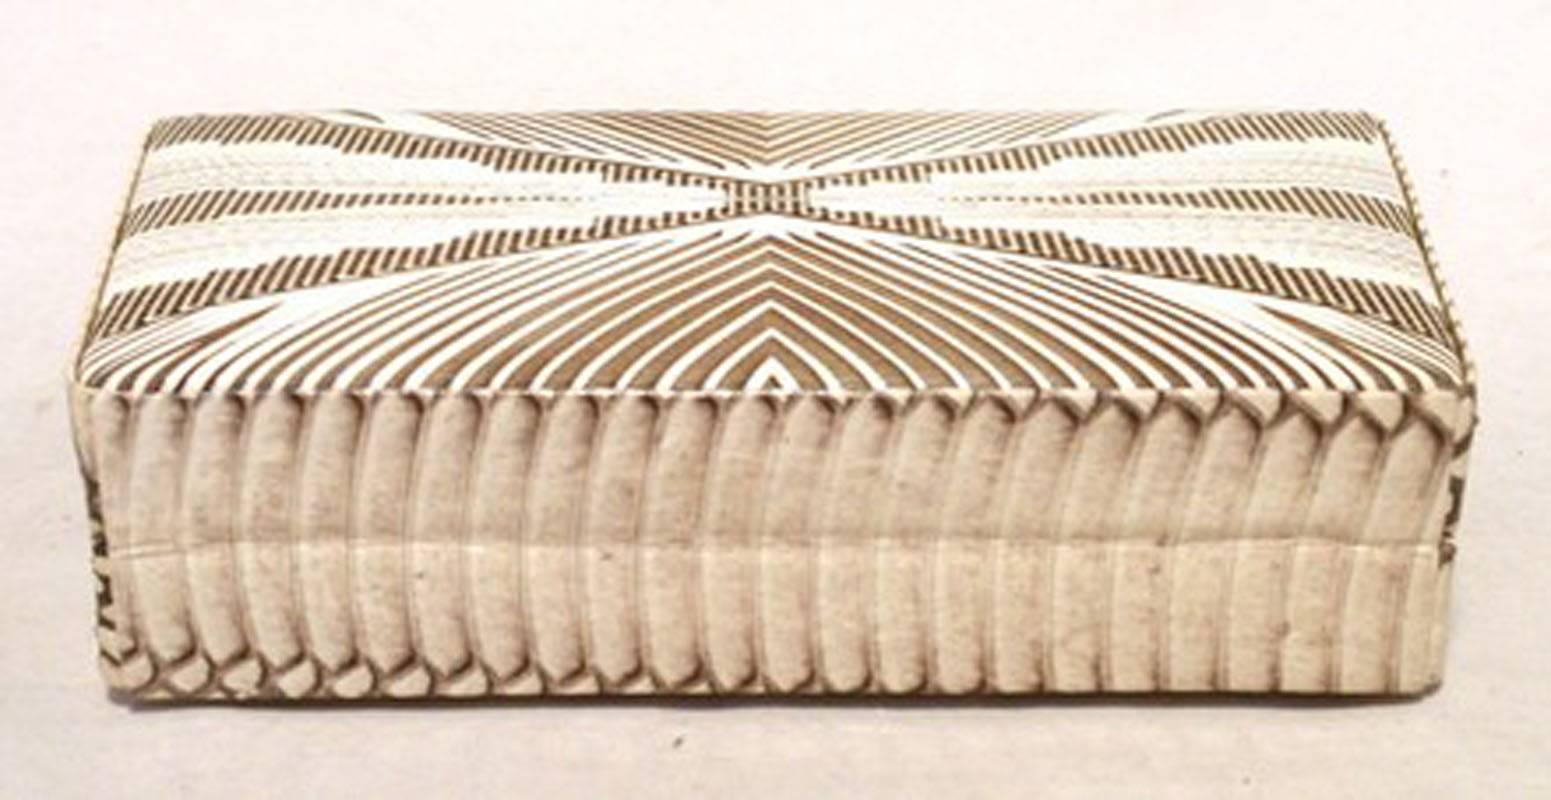 Brown Tanya Hawkes Cream and Gold Box Clutch